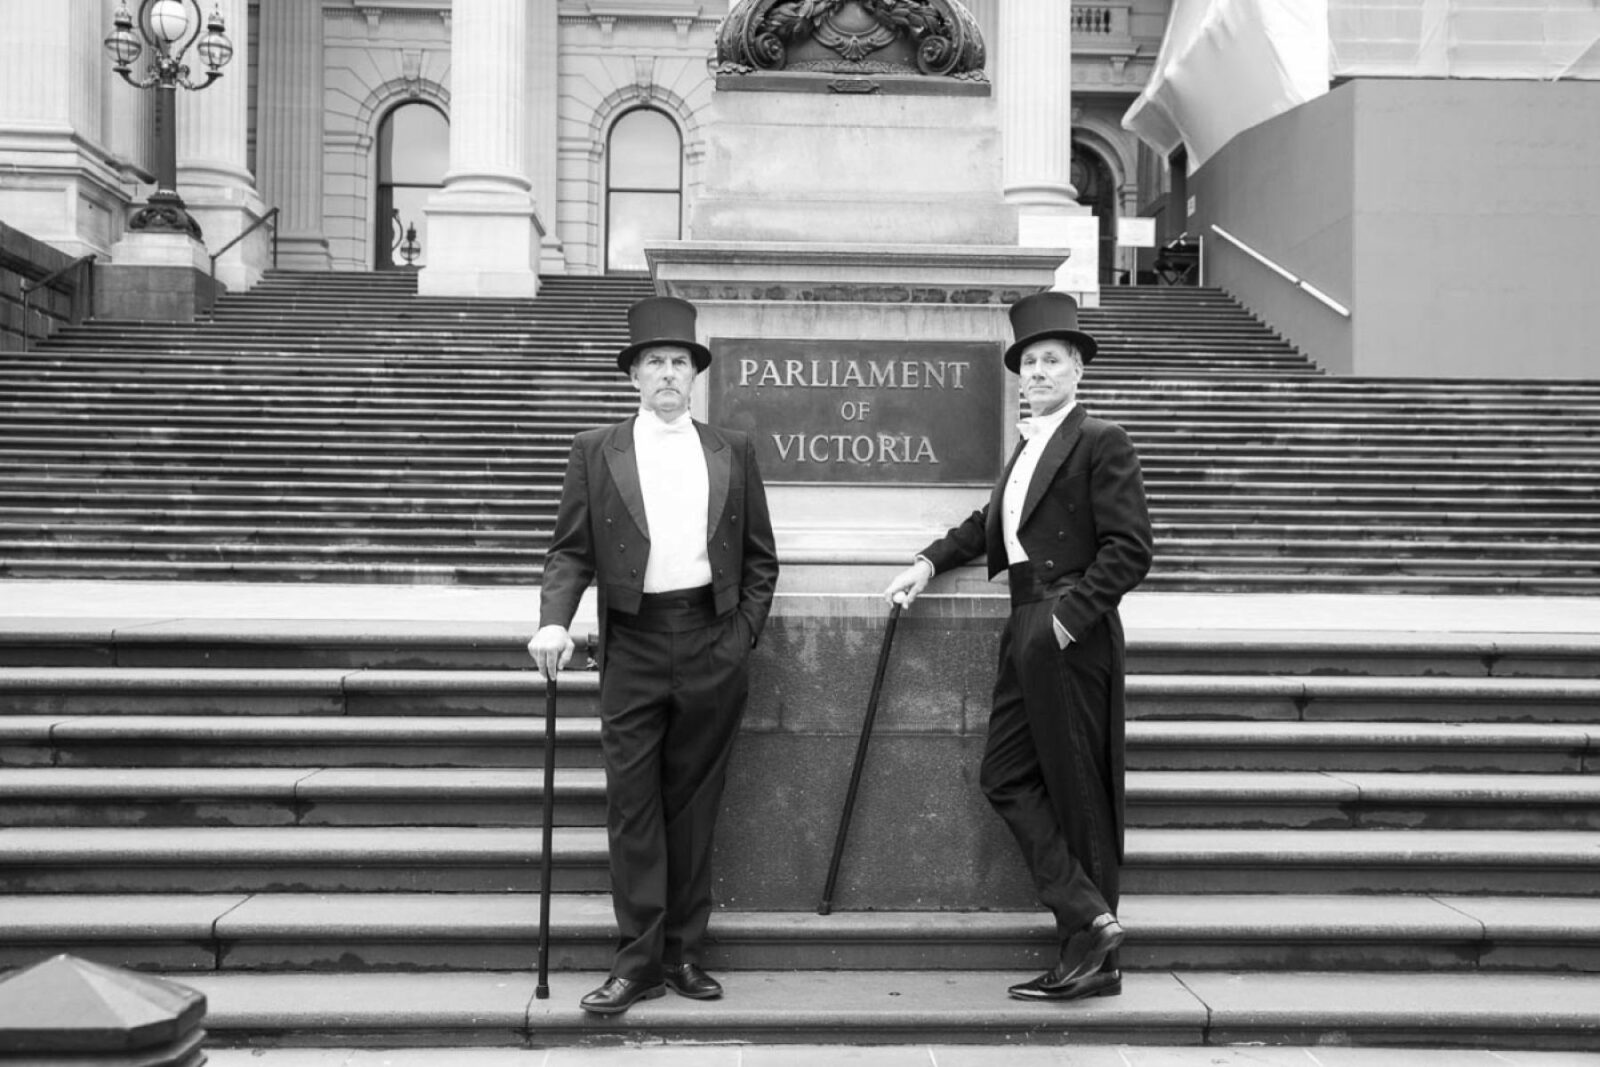 David Hobson and Colin Lane standing on steps